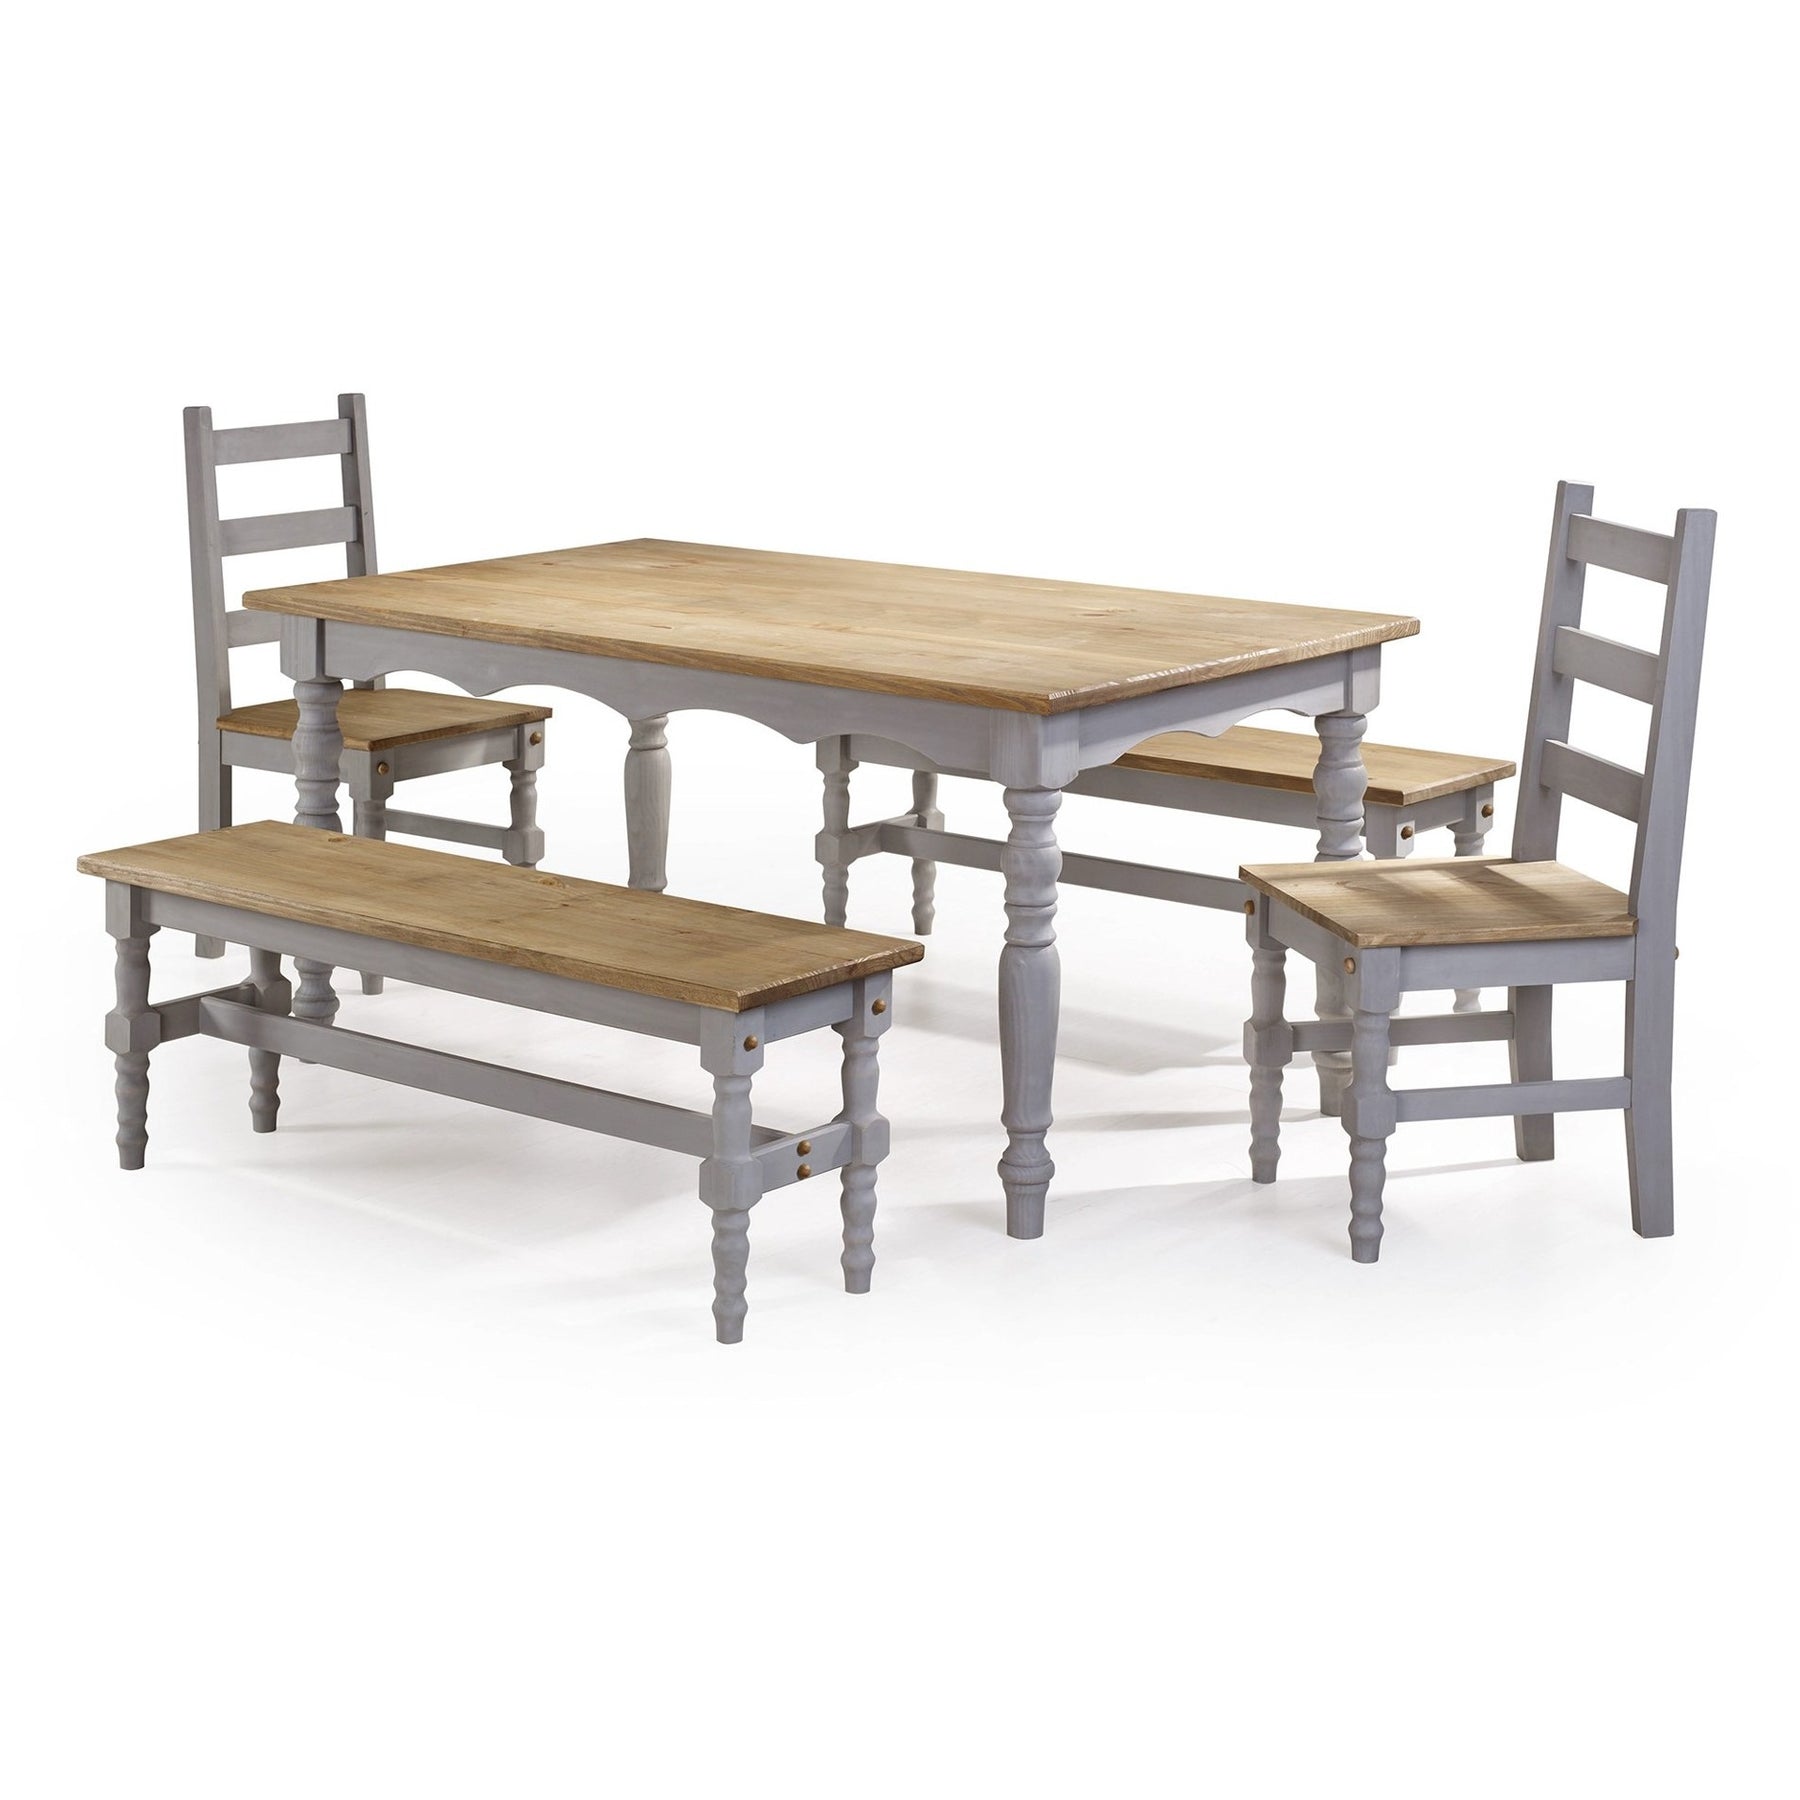 Manhattan Comfort Jay 5-Piece Solid Wood Dining Set with 2 Benches, 2 Chairs, and 1 Table in Gray Wash-Minimal & Modern